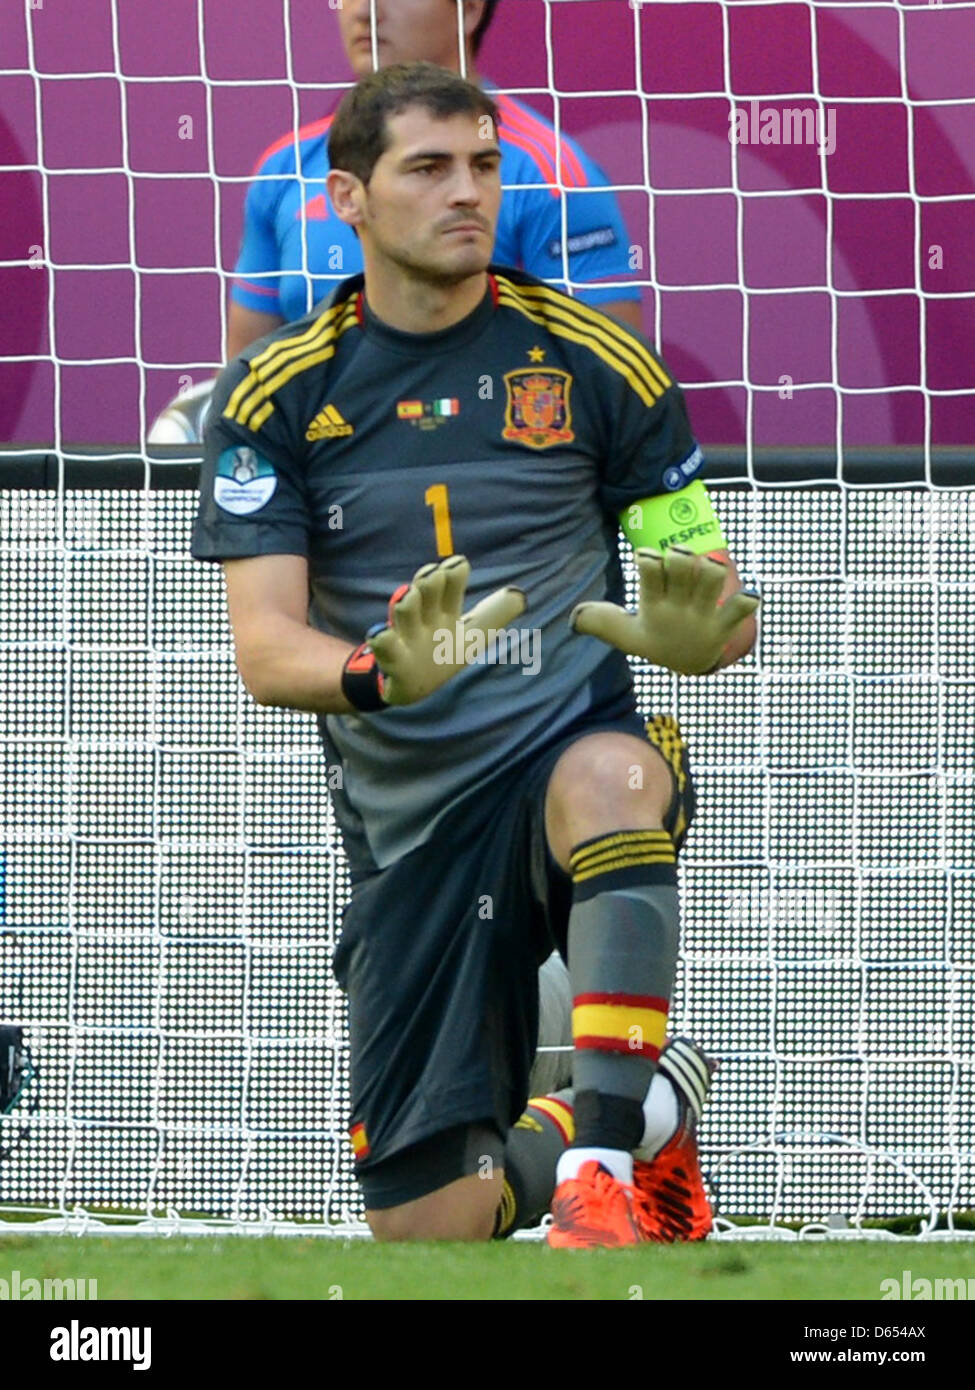 Spain's goalie Iker Casillas gestures during UEFA EURO 2012 group C soccer match Spain vs Italy at Arena Gdansk in Gdansk, Poland, 10 June 2012. Photo: Marcus Brandt dpa (Please refer to chapters 7 and 8 of http://dpaq.de/Ziovh for UEFA Euro 2012 Terms & Conditions)  +++(c) dpa - Bildfunk+++ Stock Photo